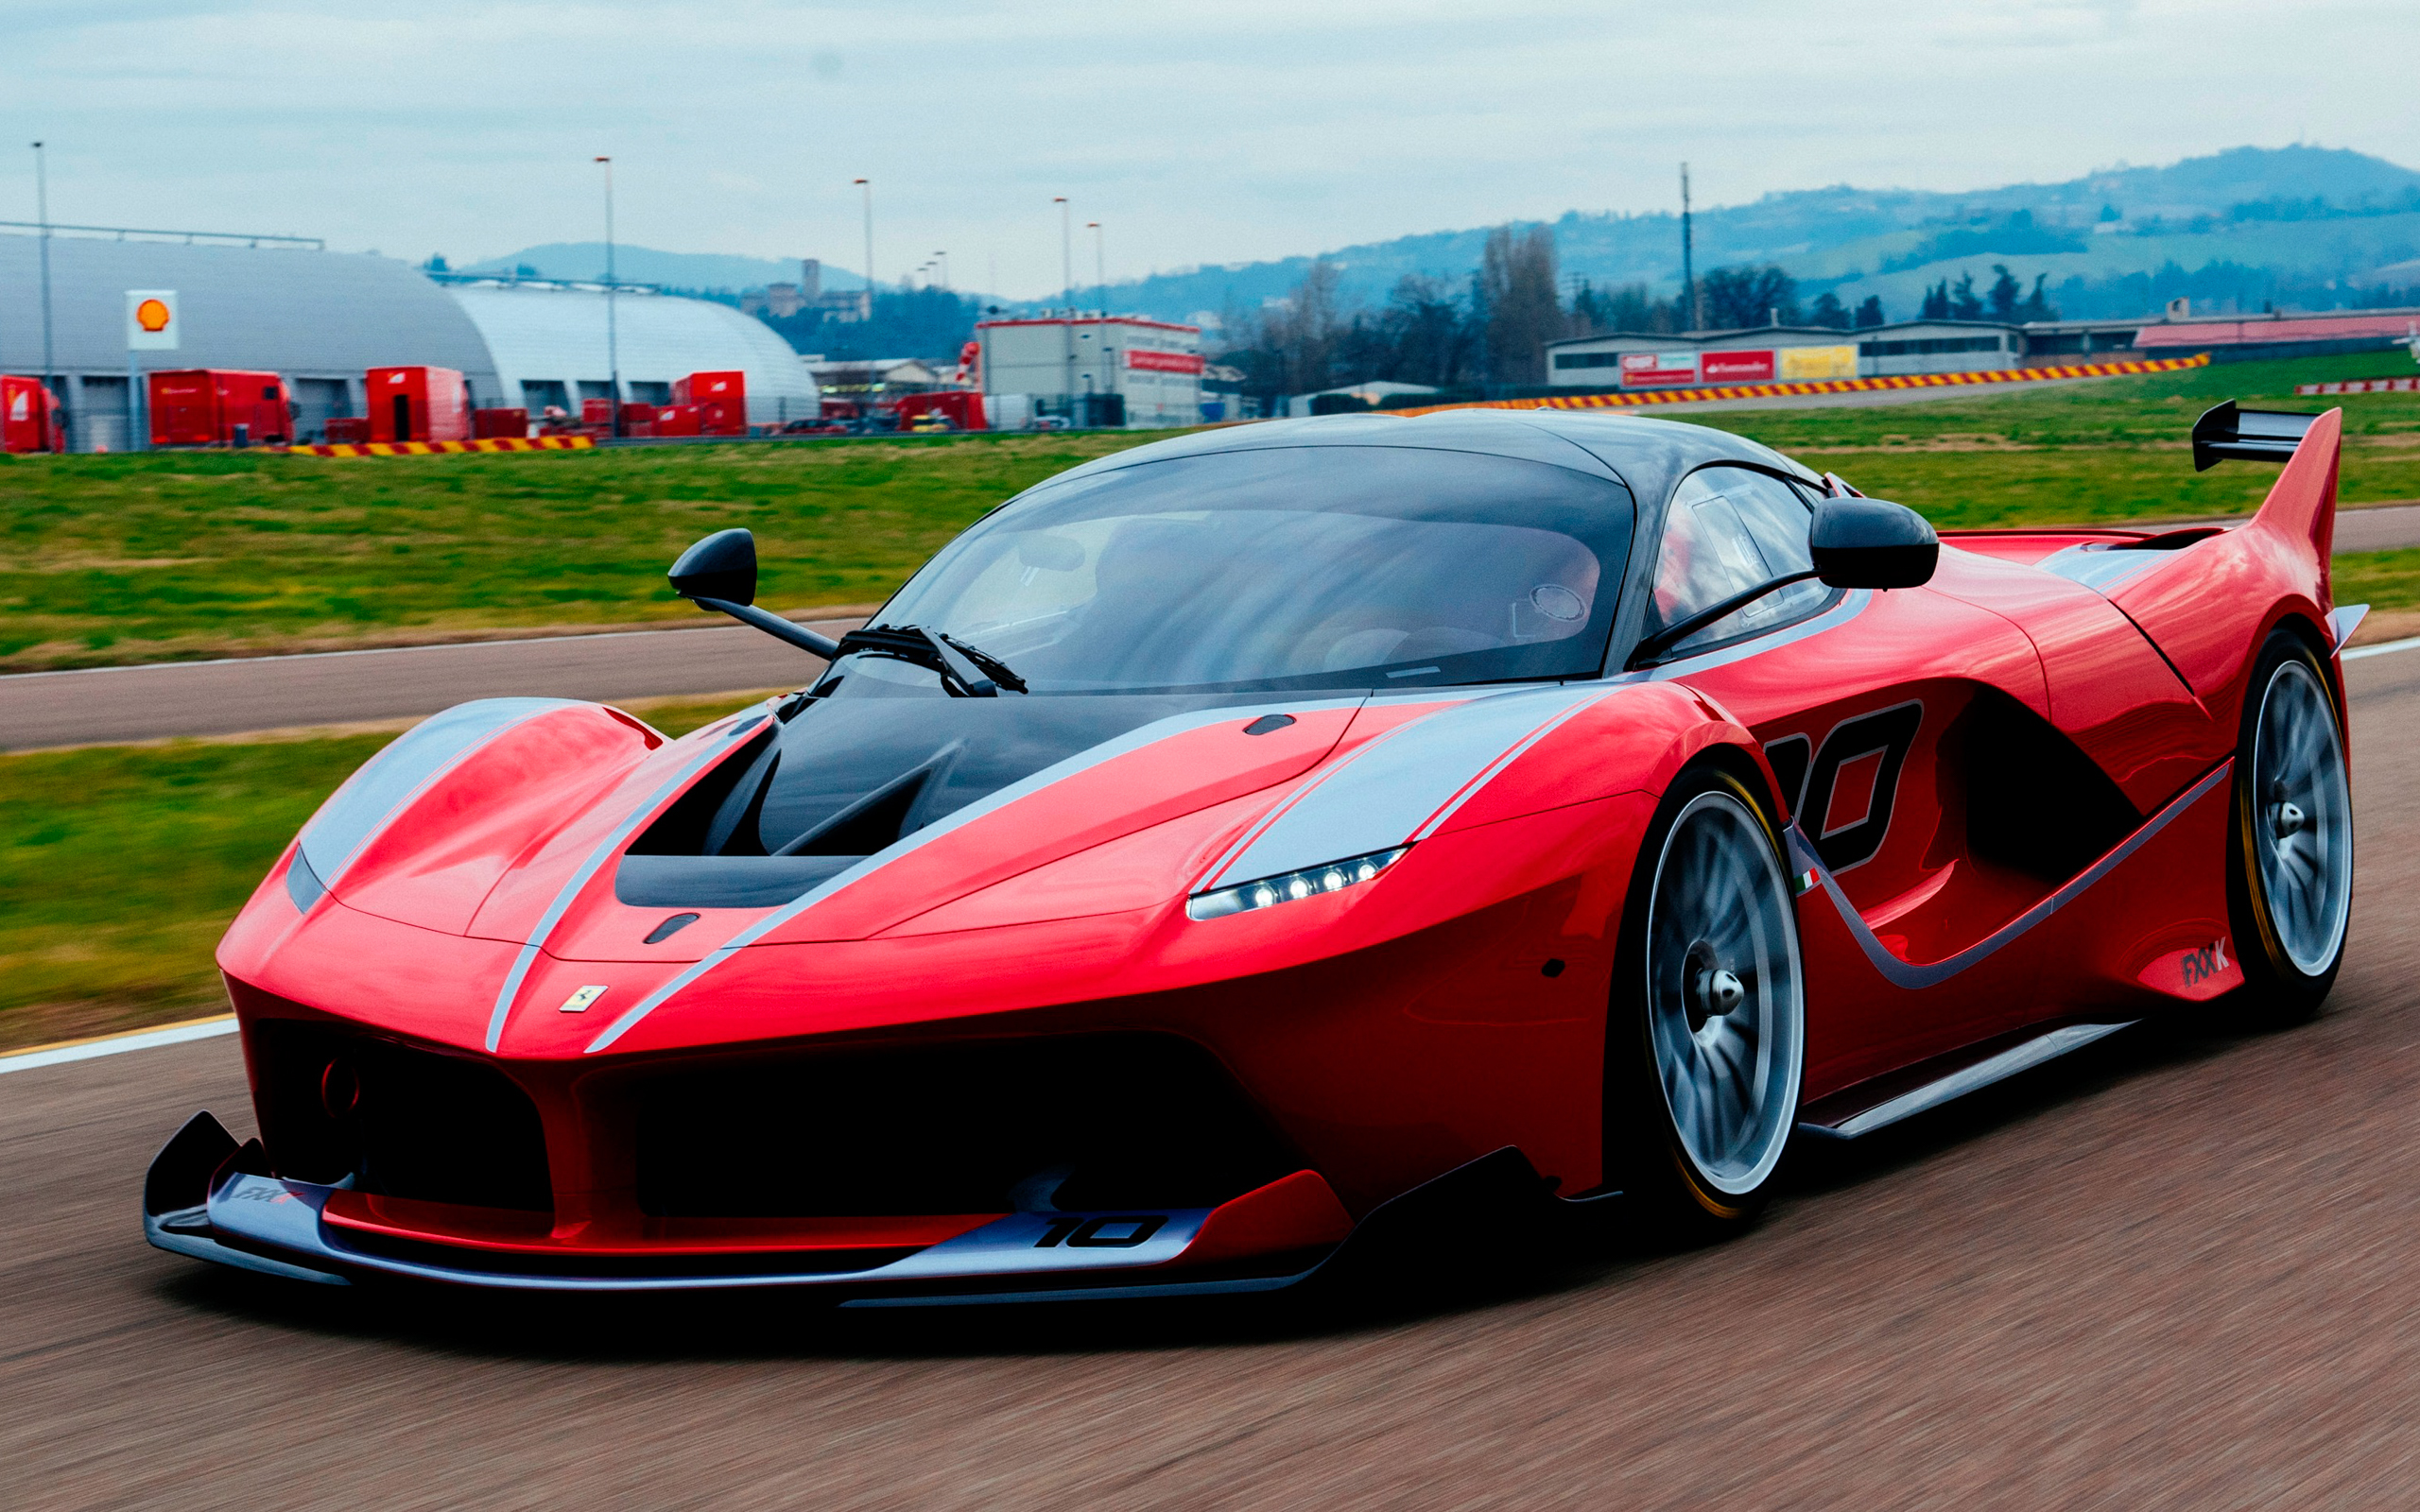 Ferrari FXX K Wallpapers Images Photos Pictures Backgrounds 2560x1600